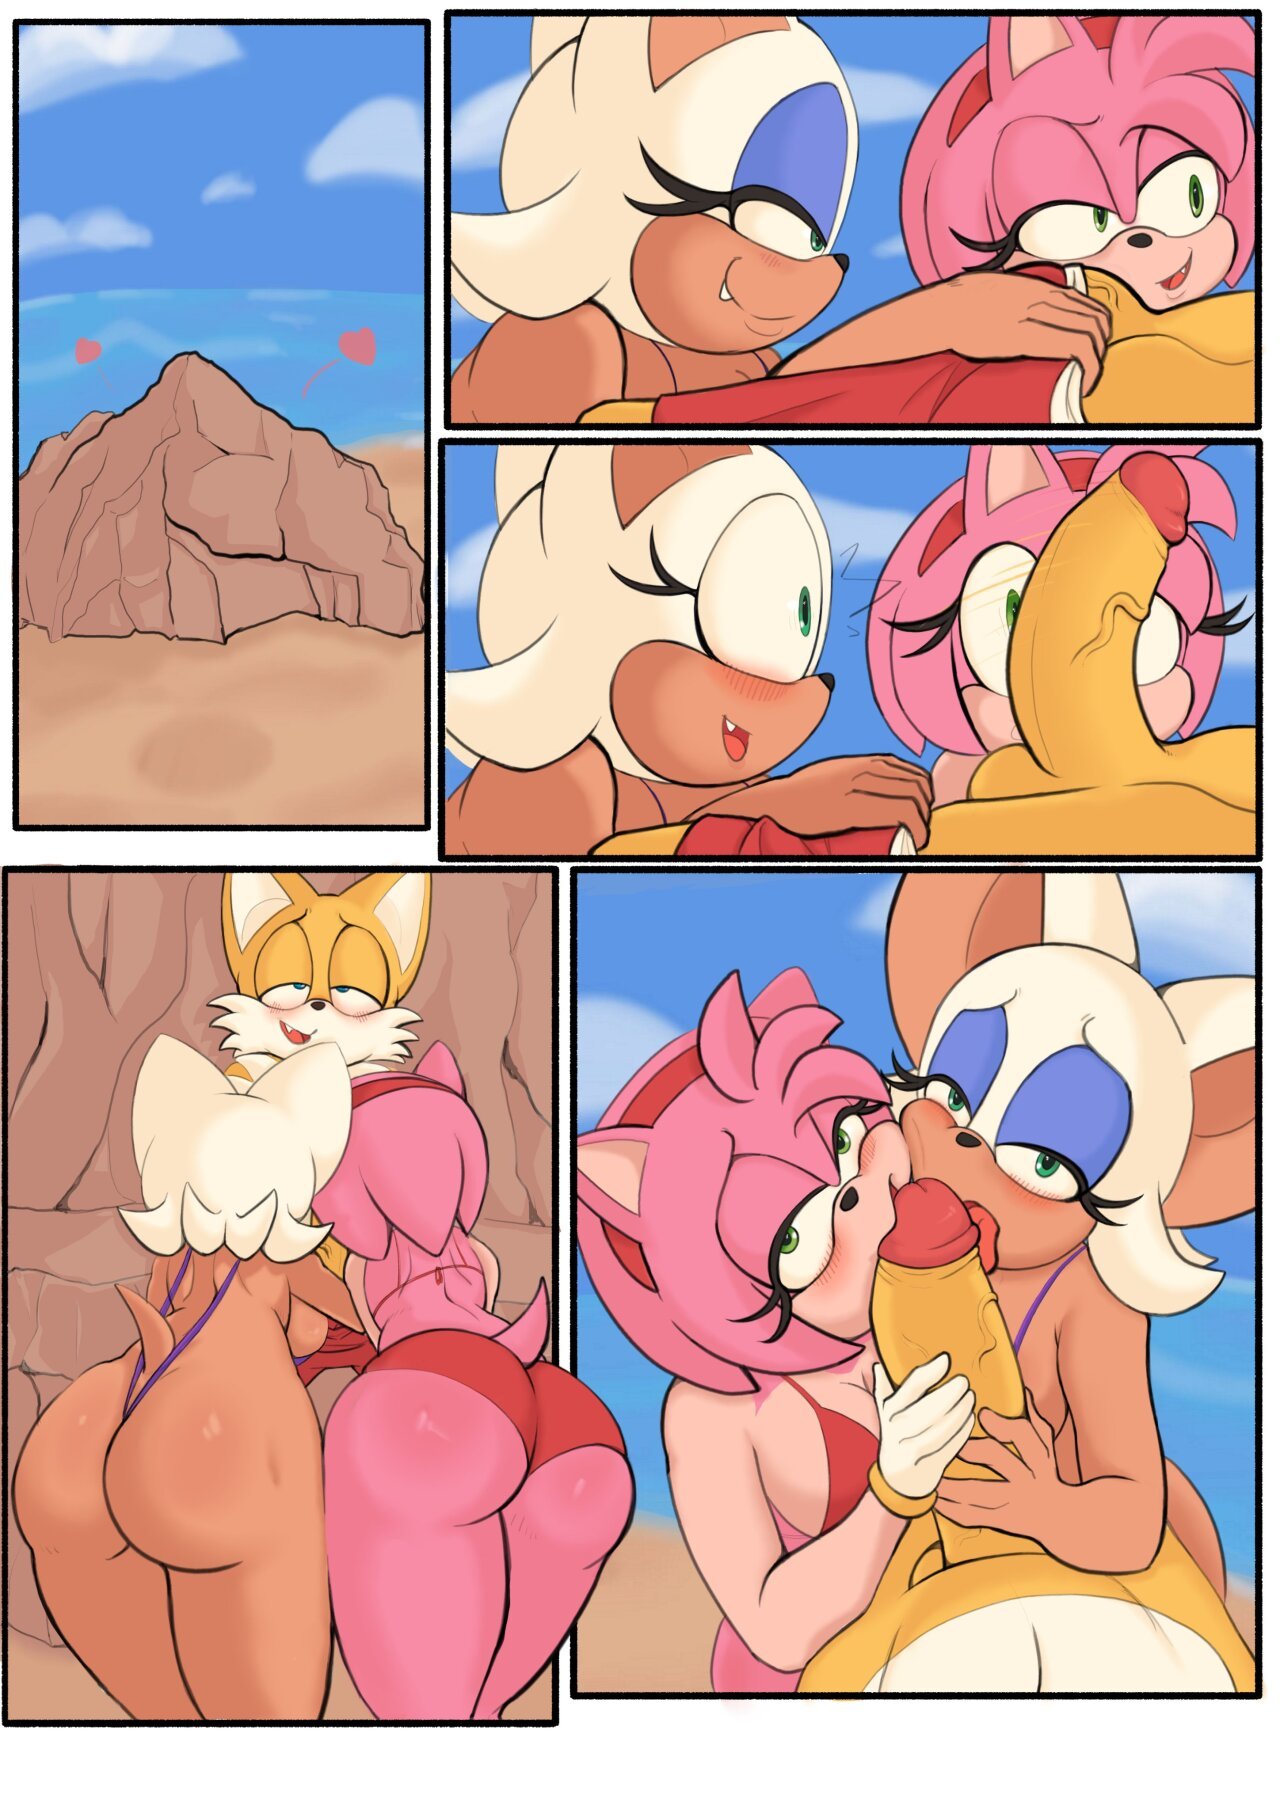 Tails at the Beach - 2